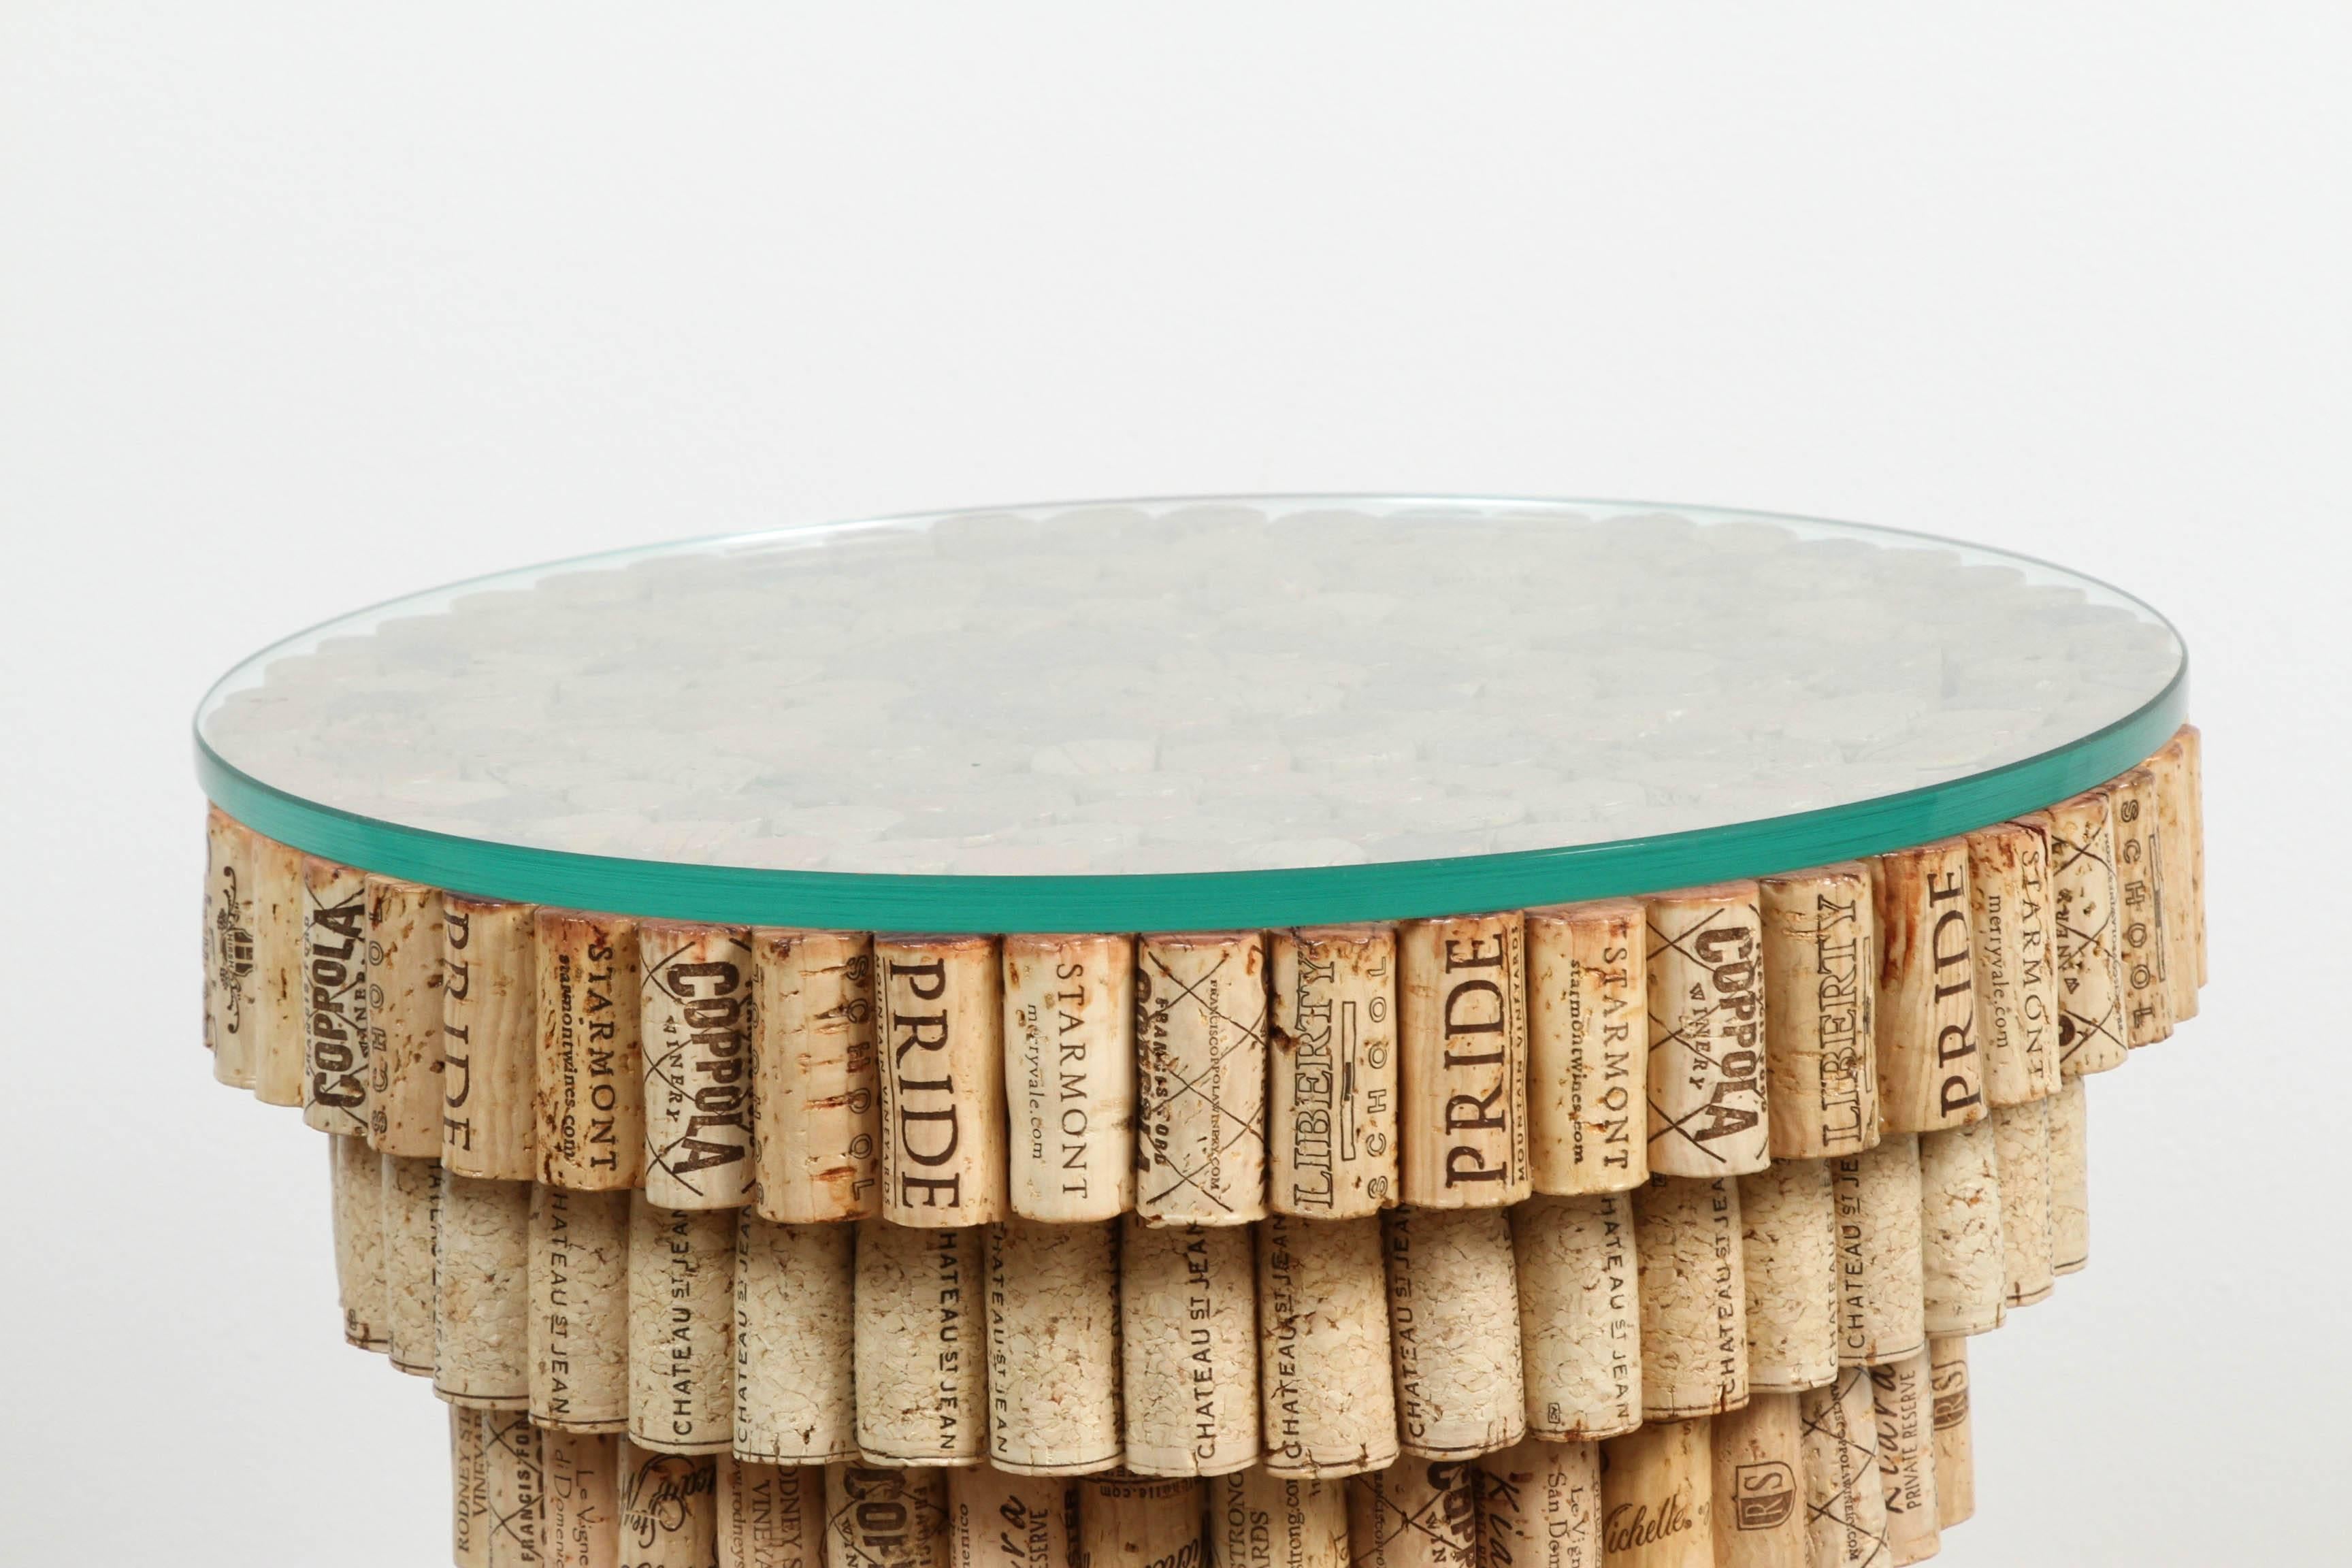 Industrial end table made out of recycled and repurposed wine corks and polymer with glass top. Karyl Sisson is in public collections such as the Museum of Arts and Design in New York, Museum of Fine Art in Boston and several more. Her resume upon